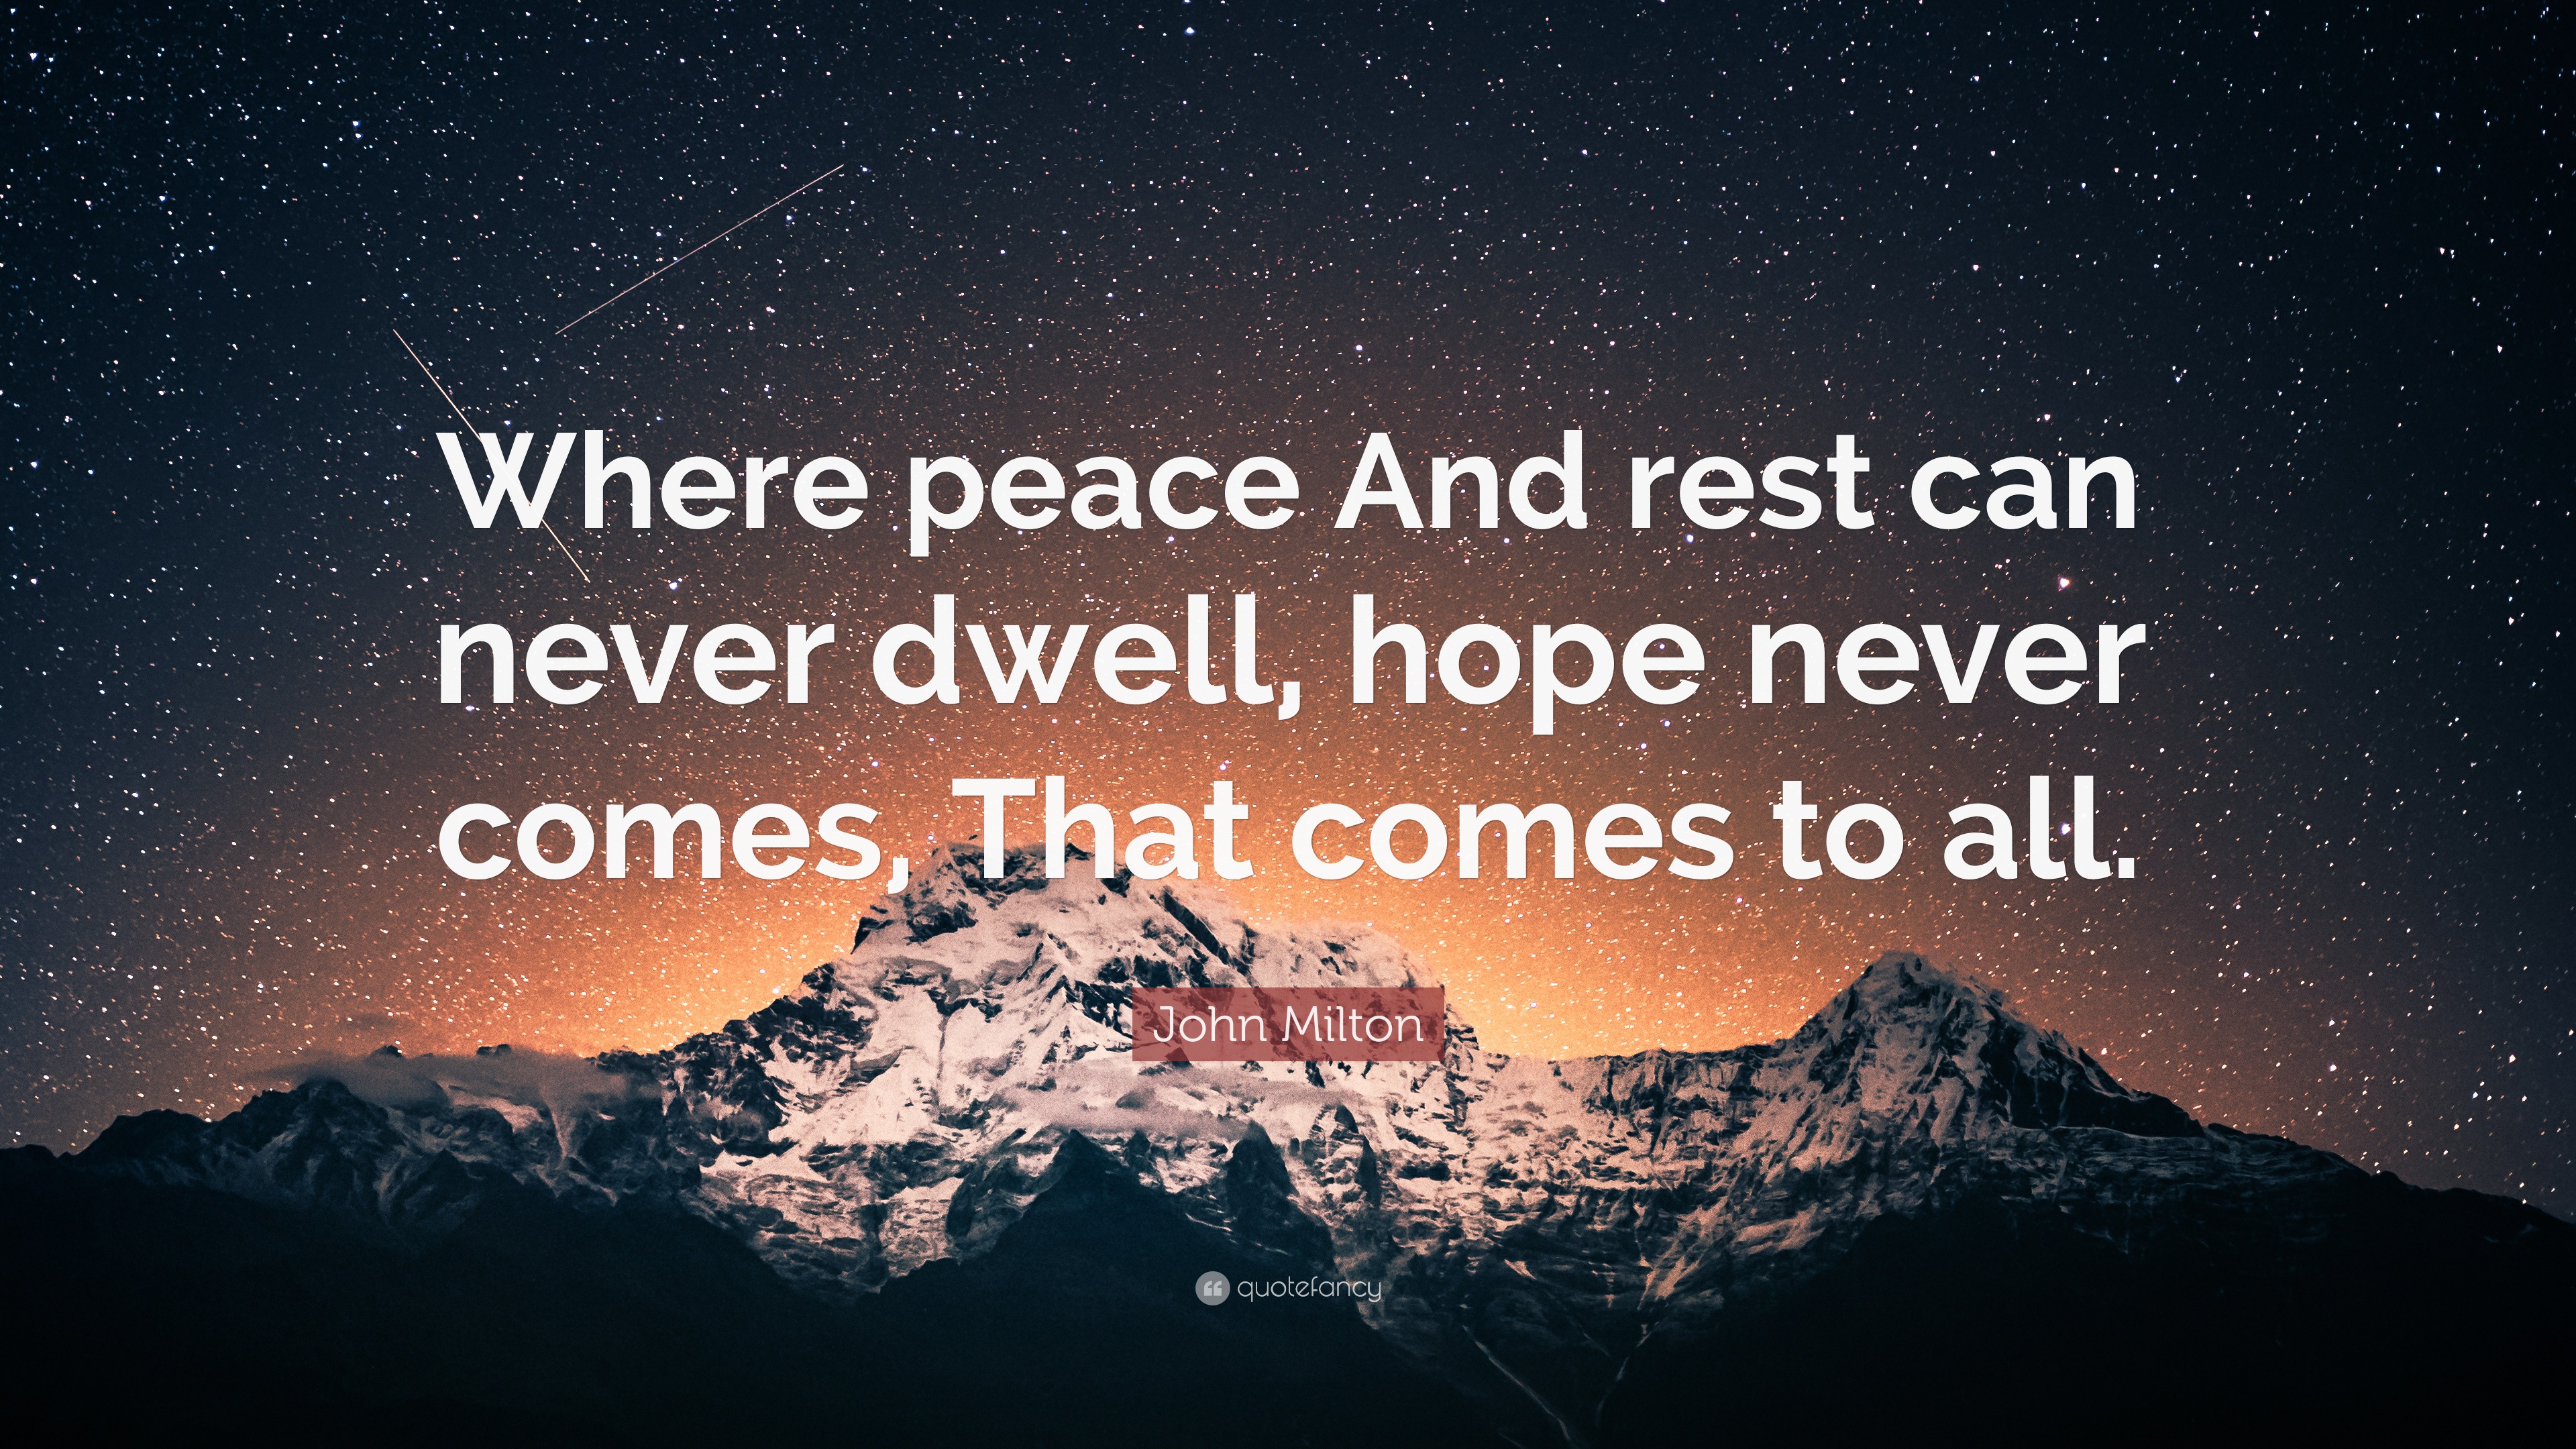 John Milton Quote: “Where peace And rest can never dwell, hope never ...